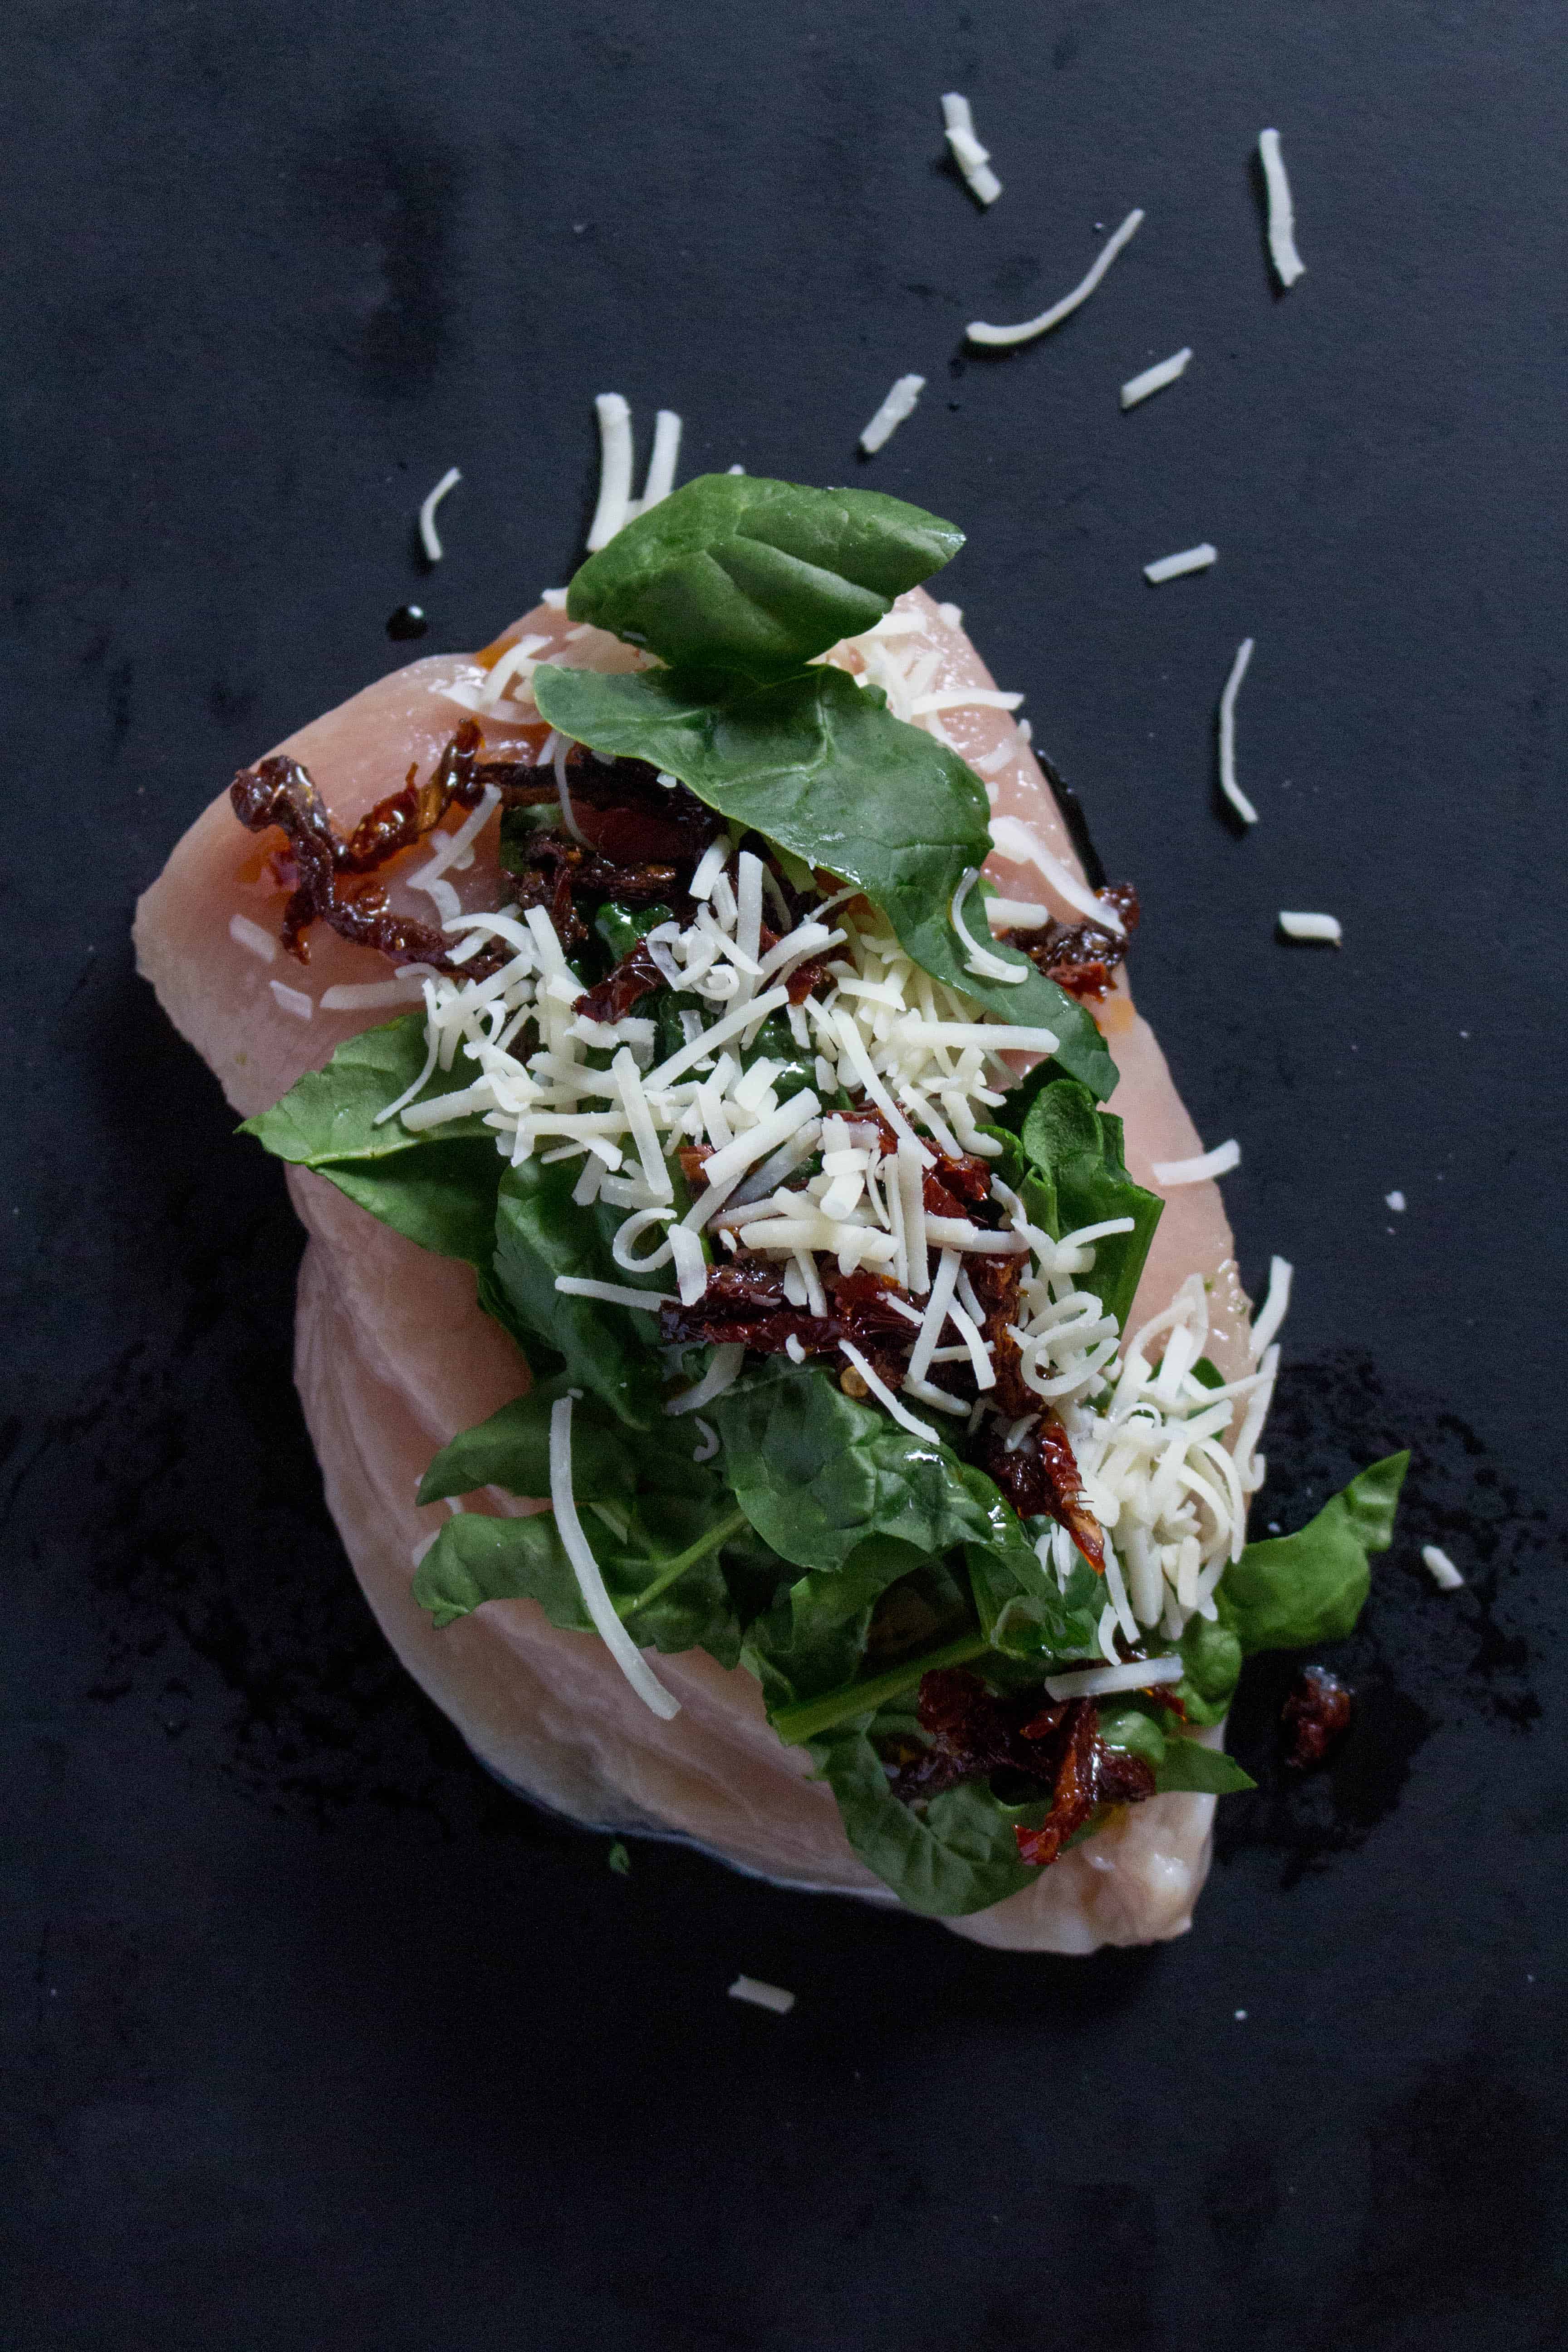 How to stuff chicken breast - butterflied chicken breast with sun dried tomatoes, spinach, and cheese | Looking to change up your regular boring chicken meal prep? This Spinach, Sun Dried Tomato, and Cheese Stuffed Chicken Meal Prep will have you asking for more as it is stuffed with flavour without having to spend time marinating!